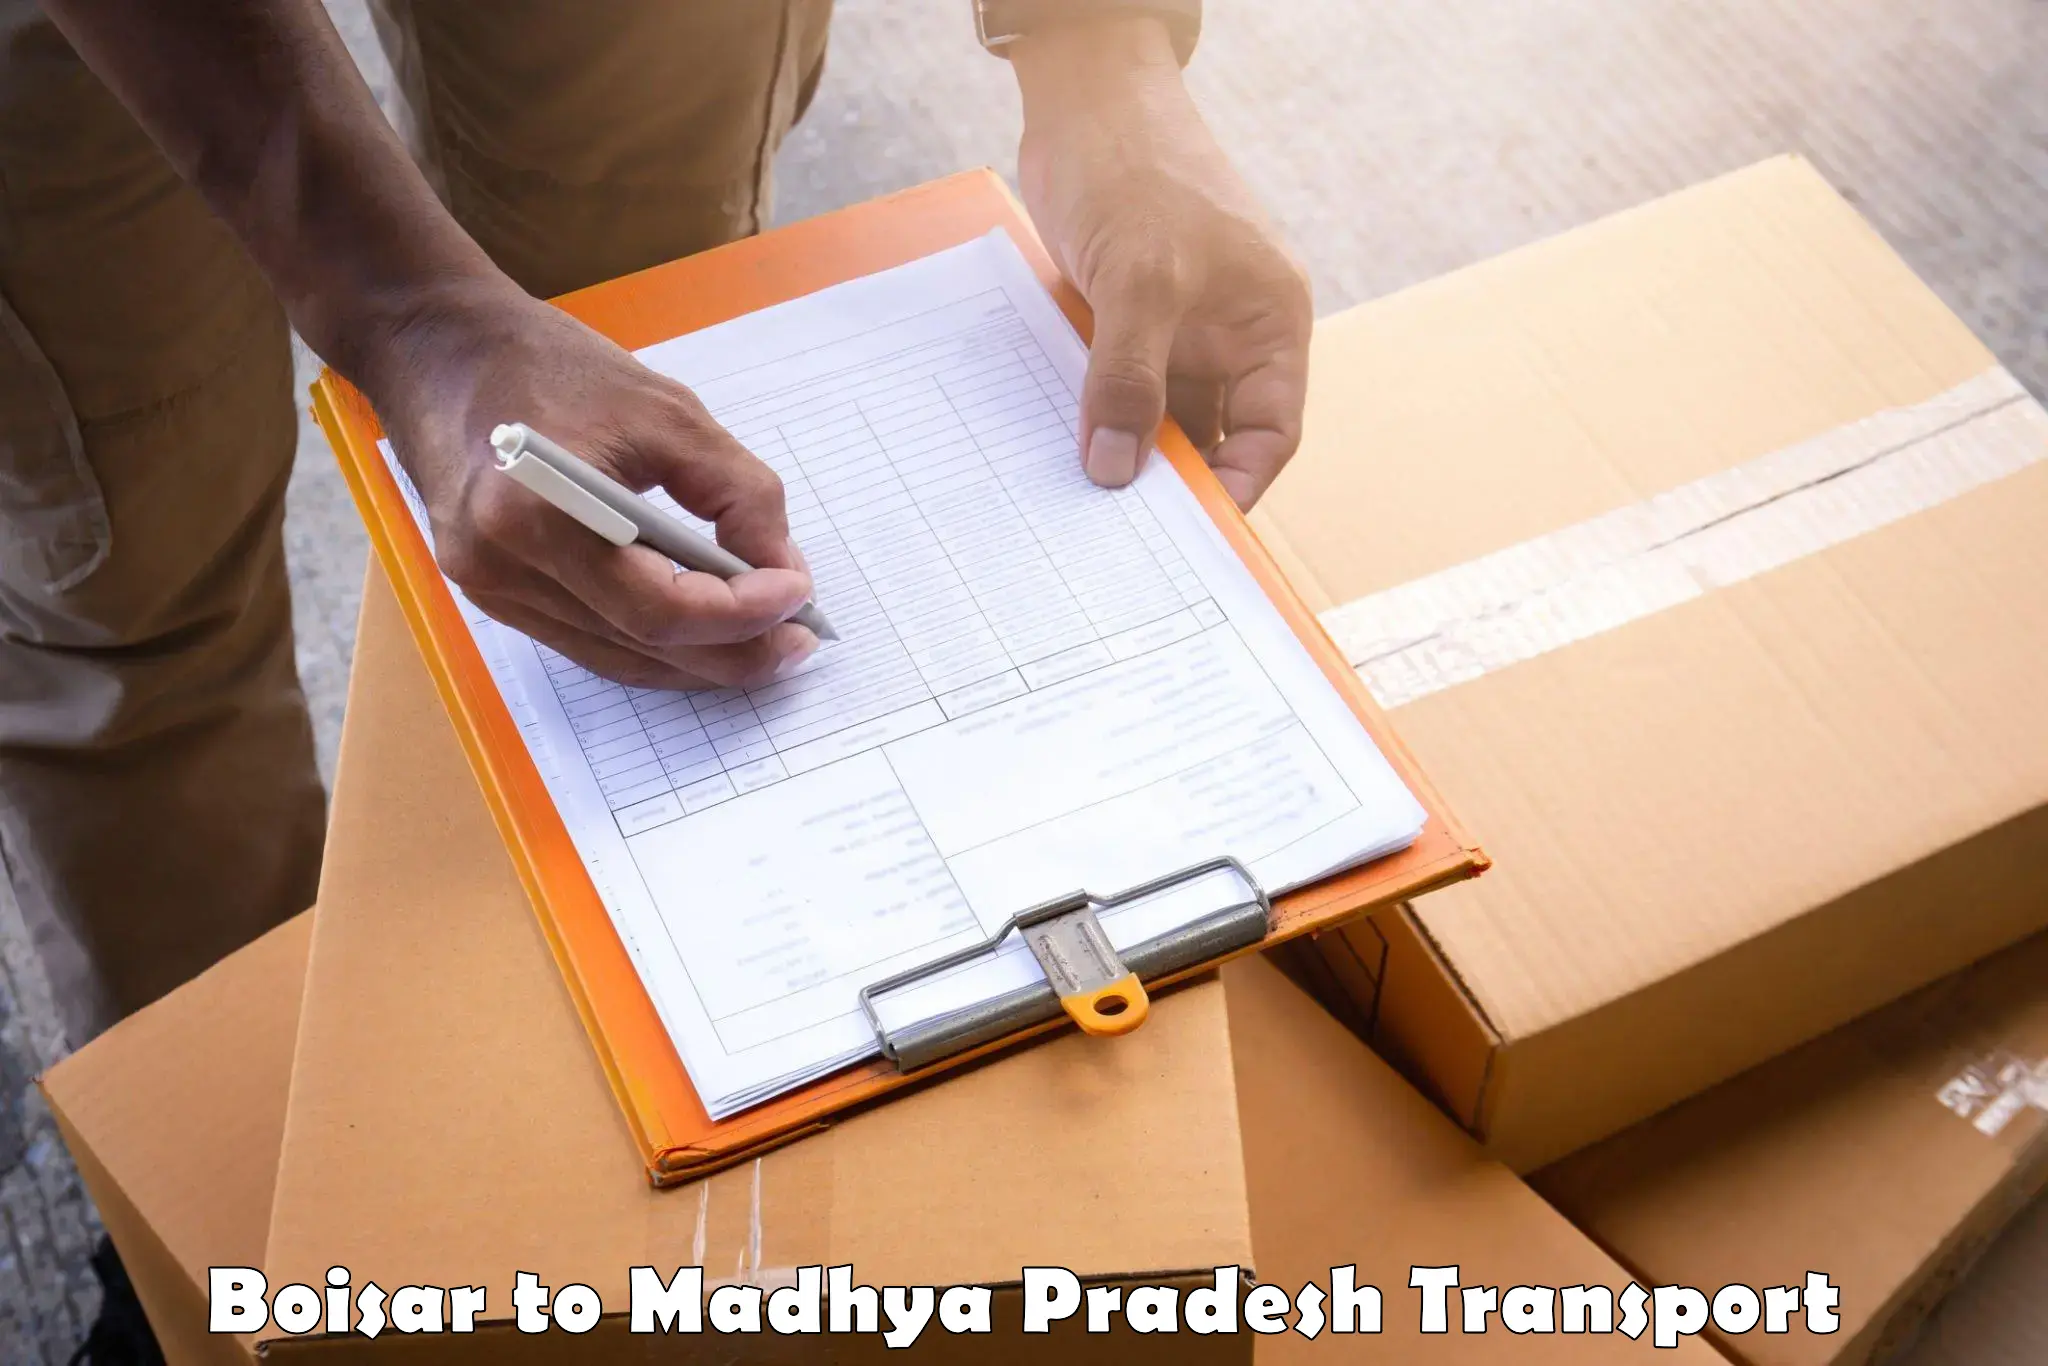 Truck transport companies in India Boisar to Chapda